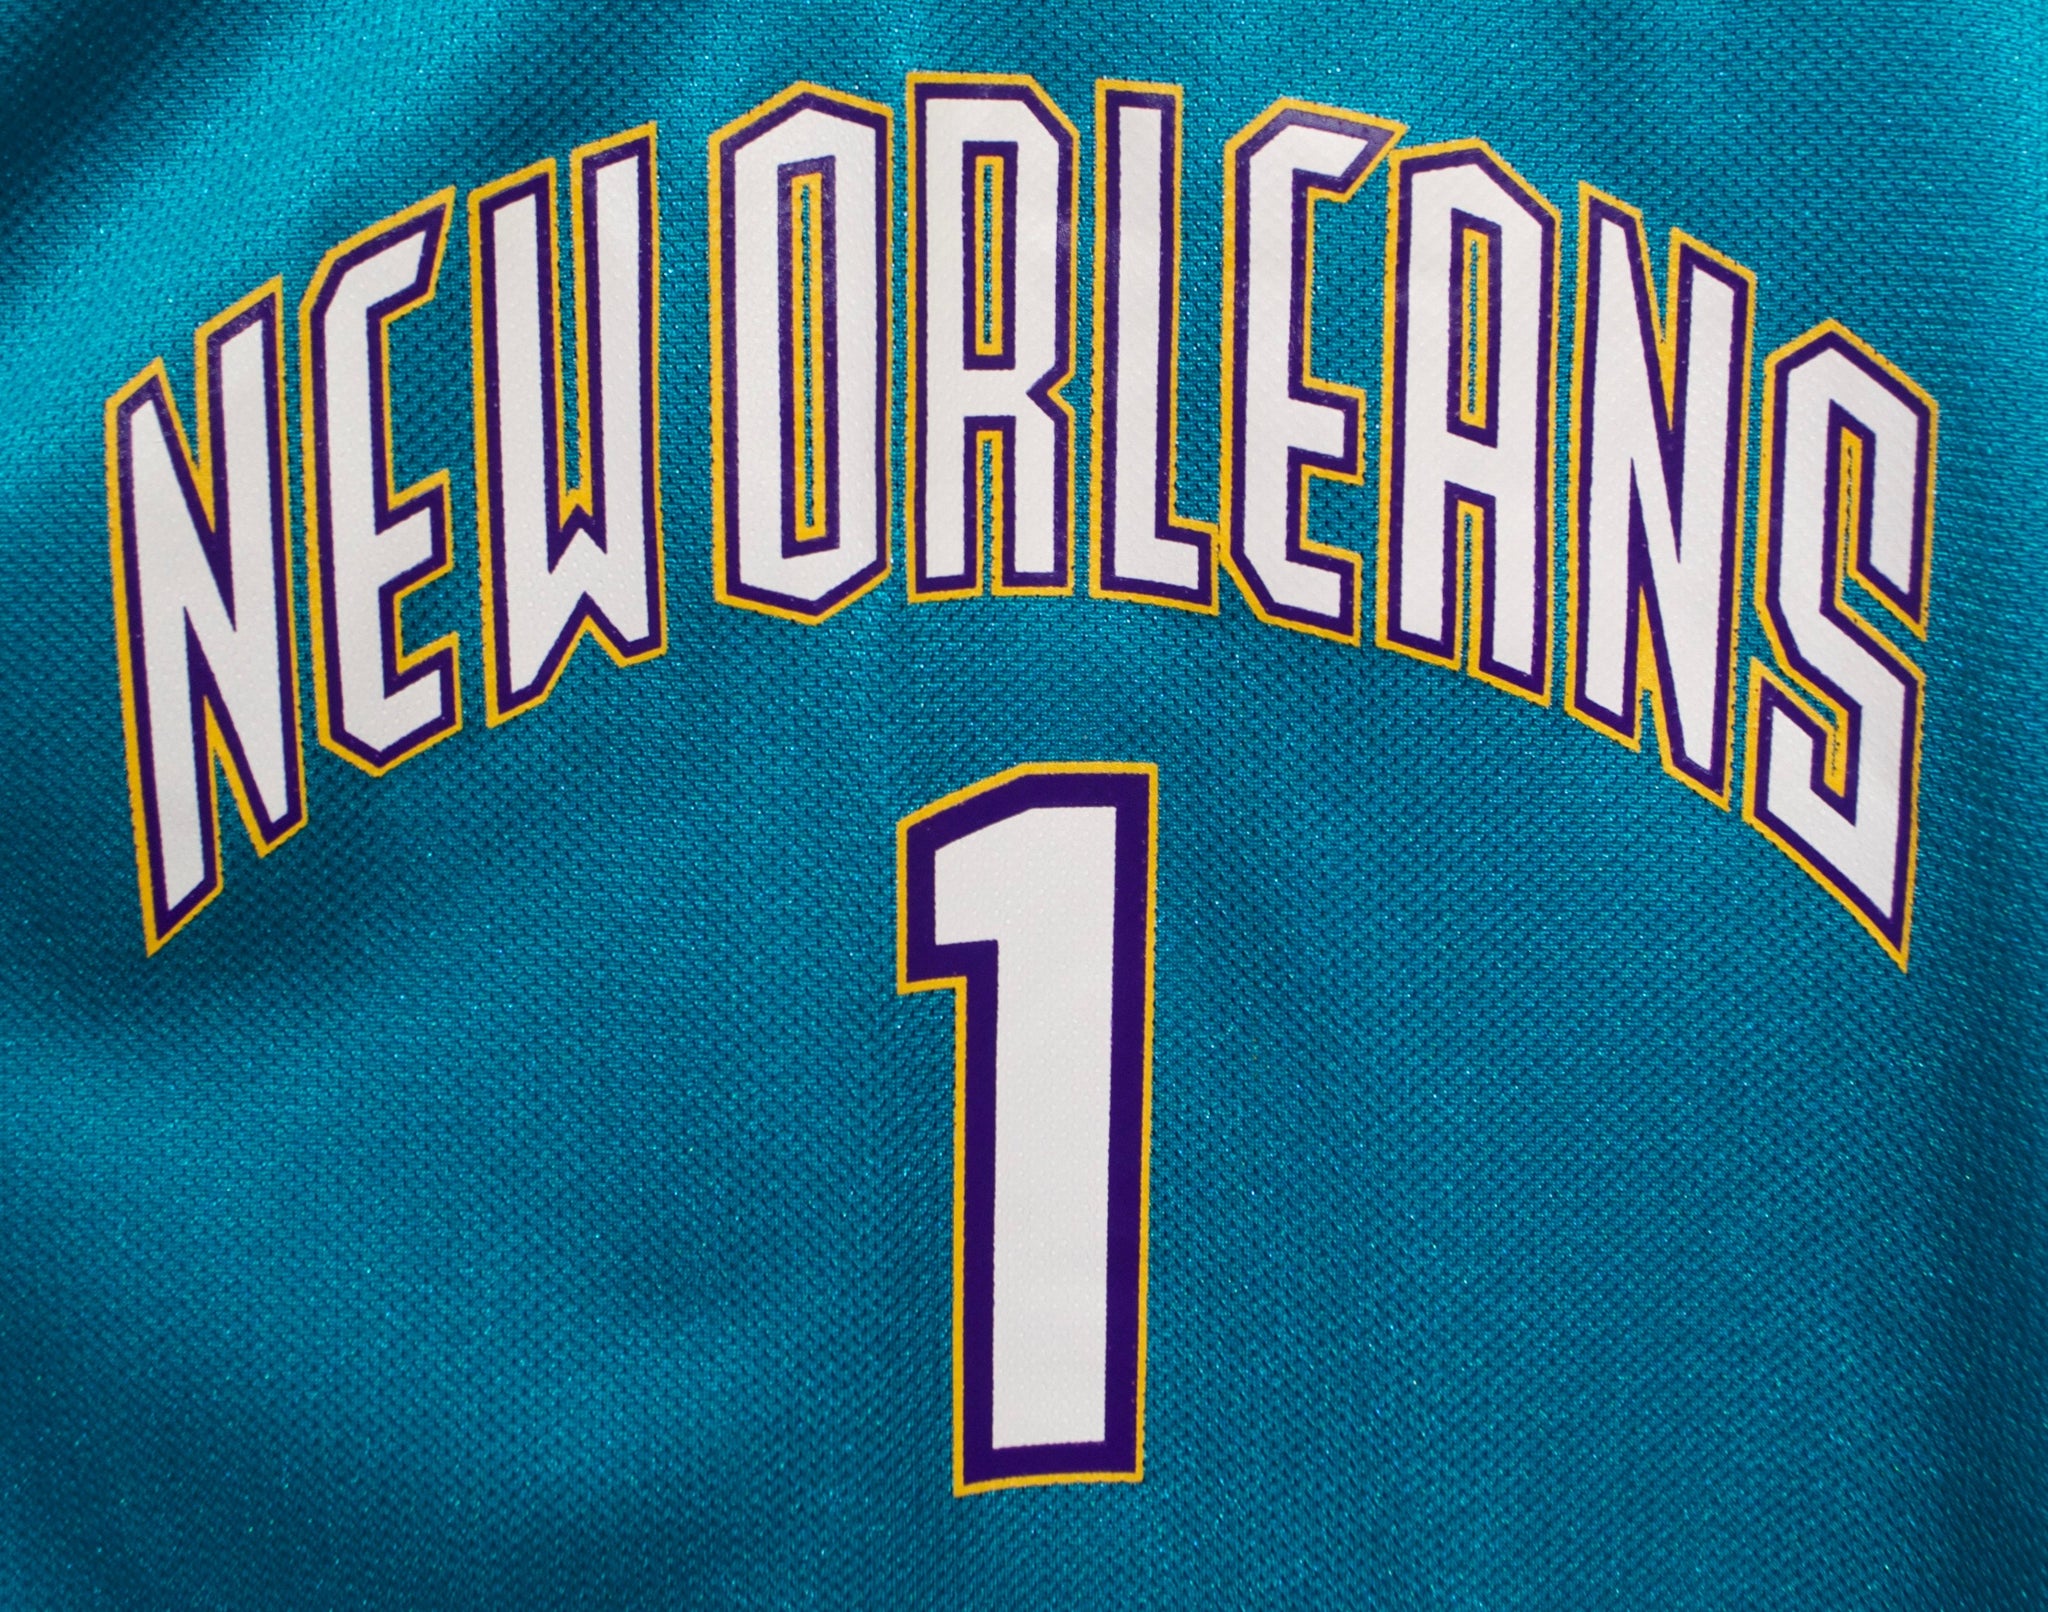 yellow new orleans hornets jersey